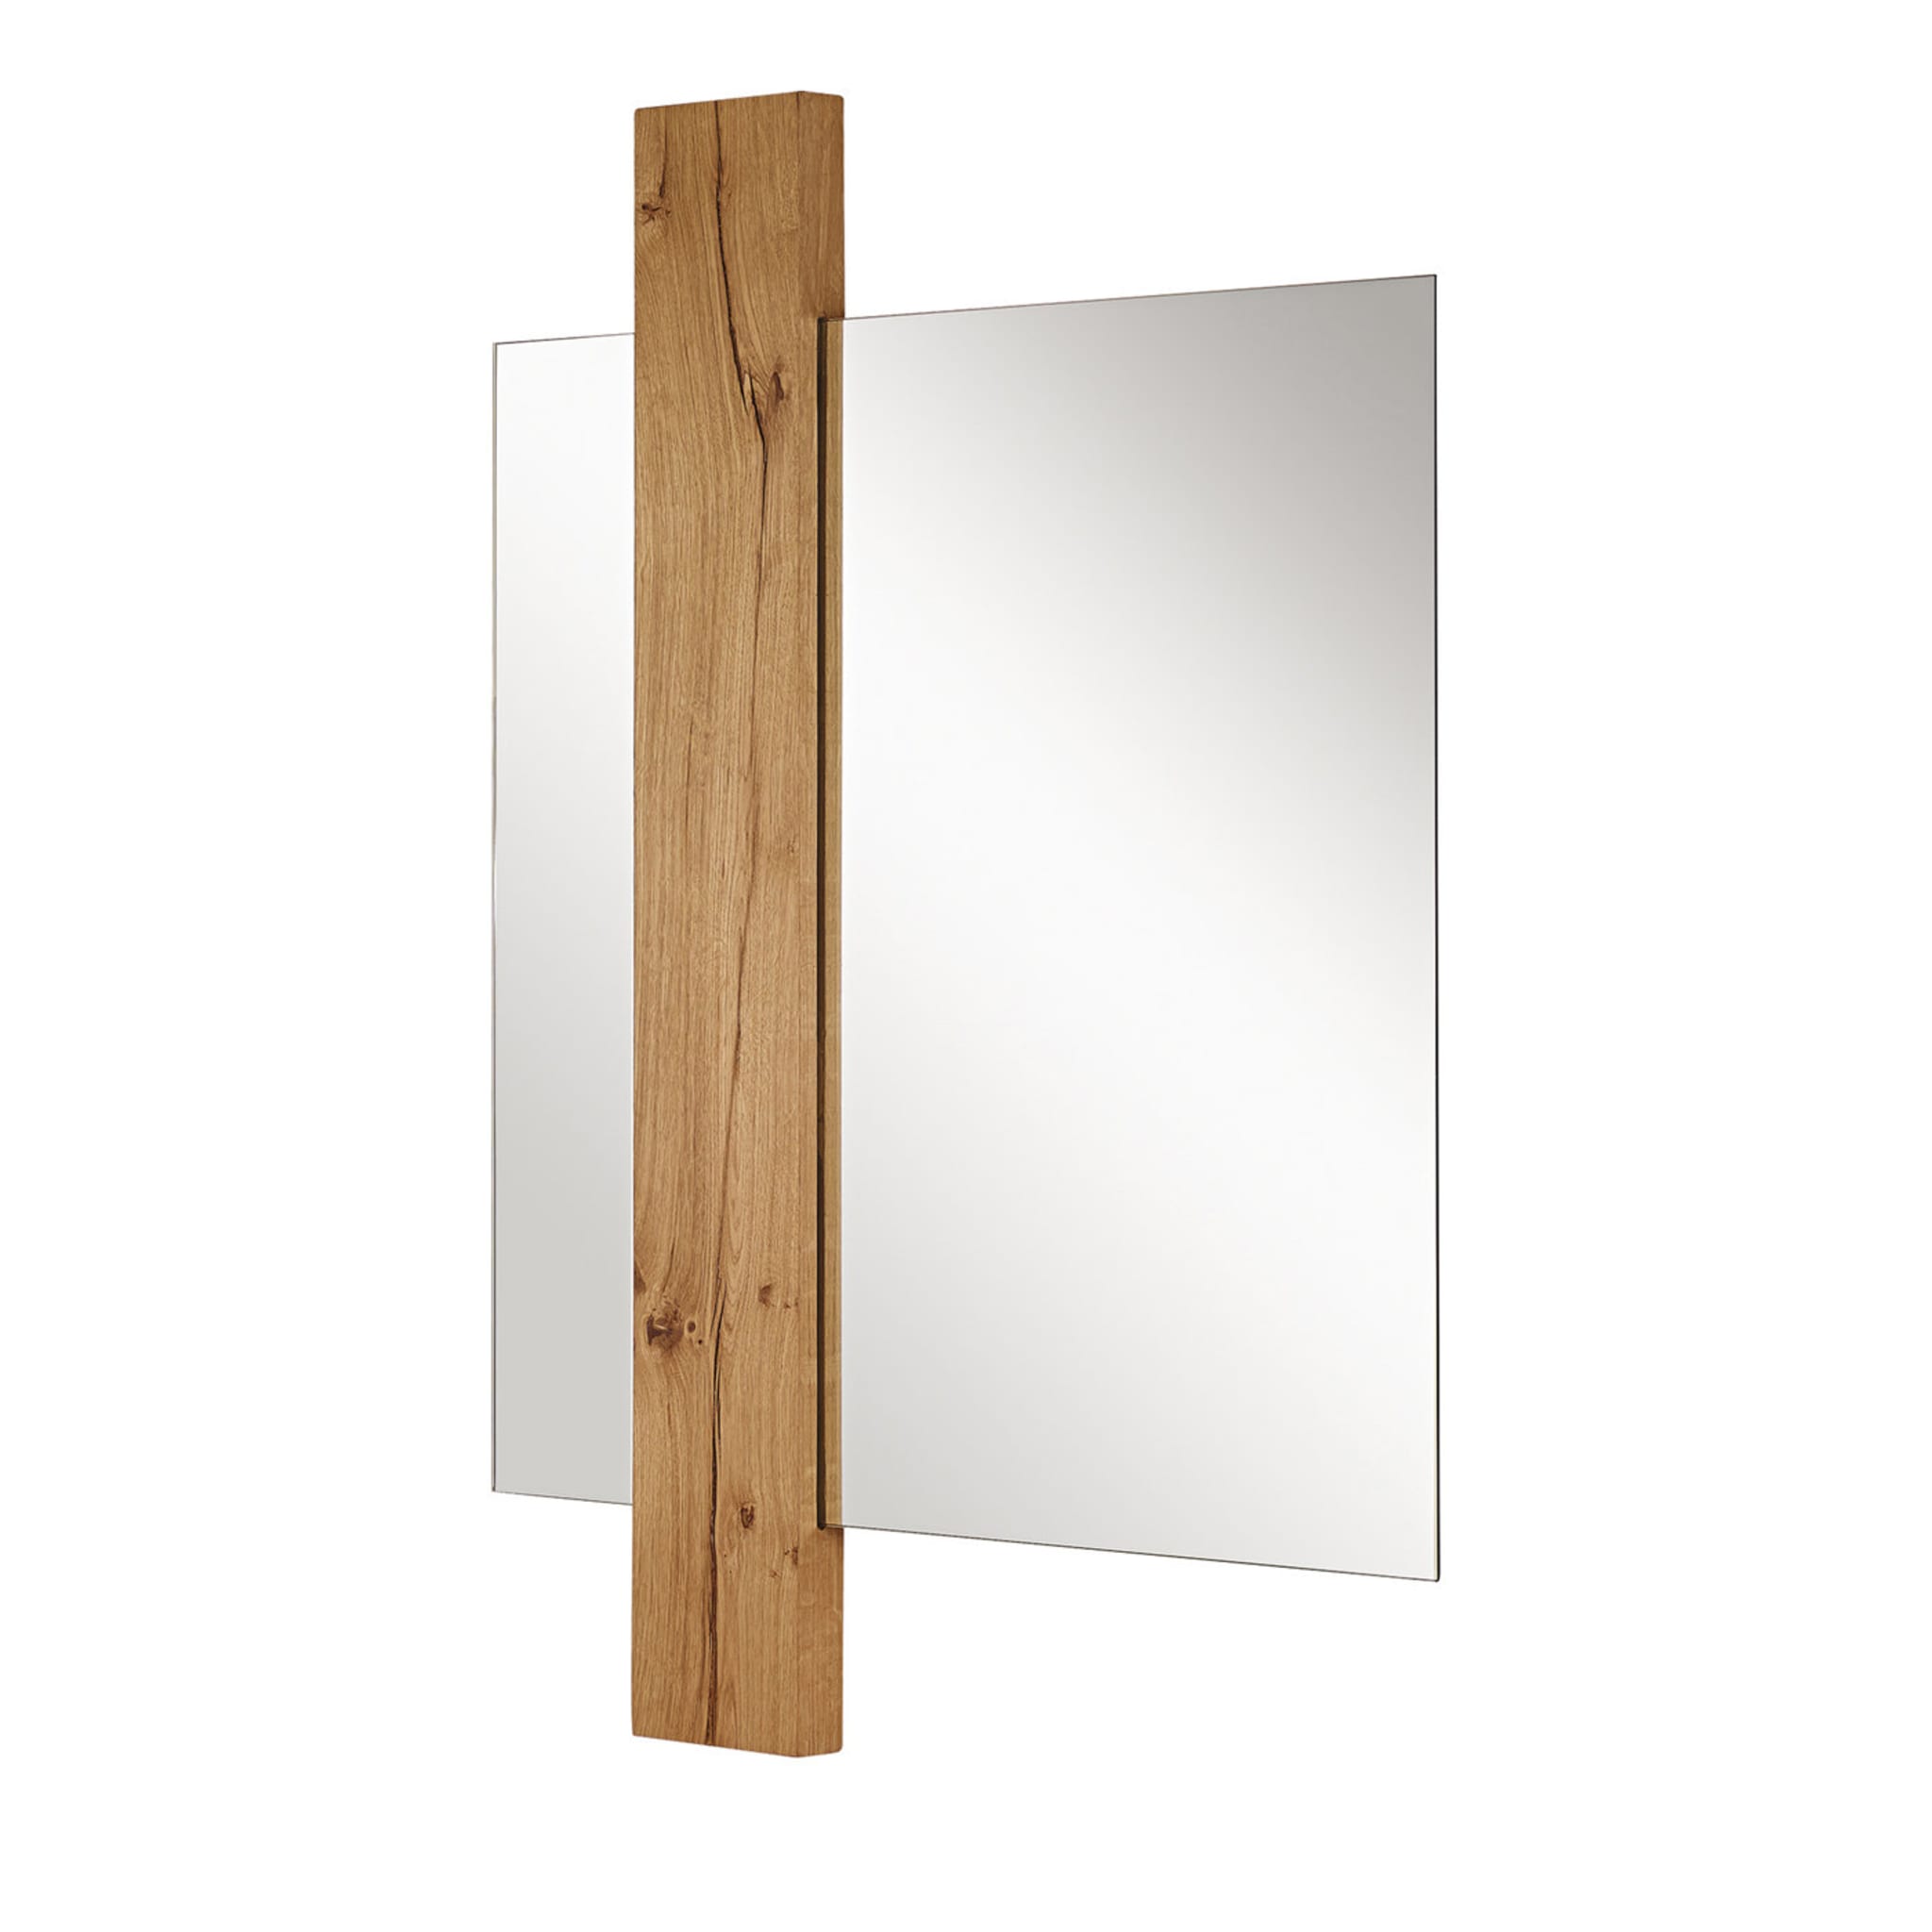 Sunset S Wall Mirror by Studio14 - Main view